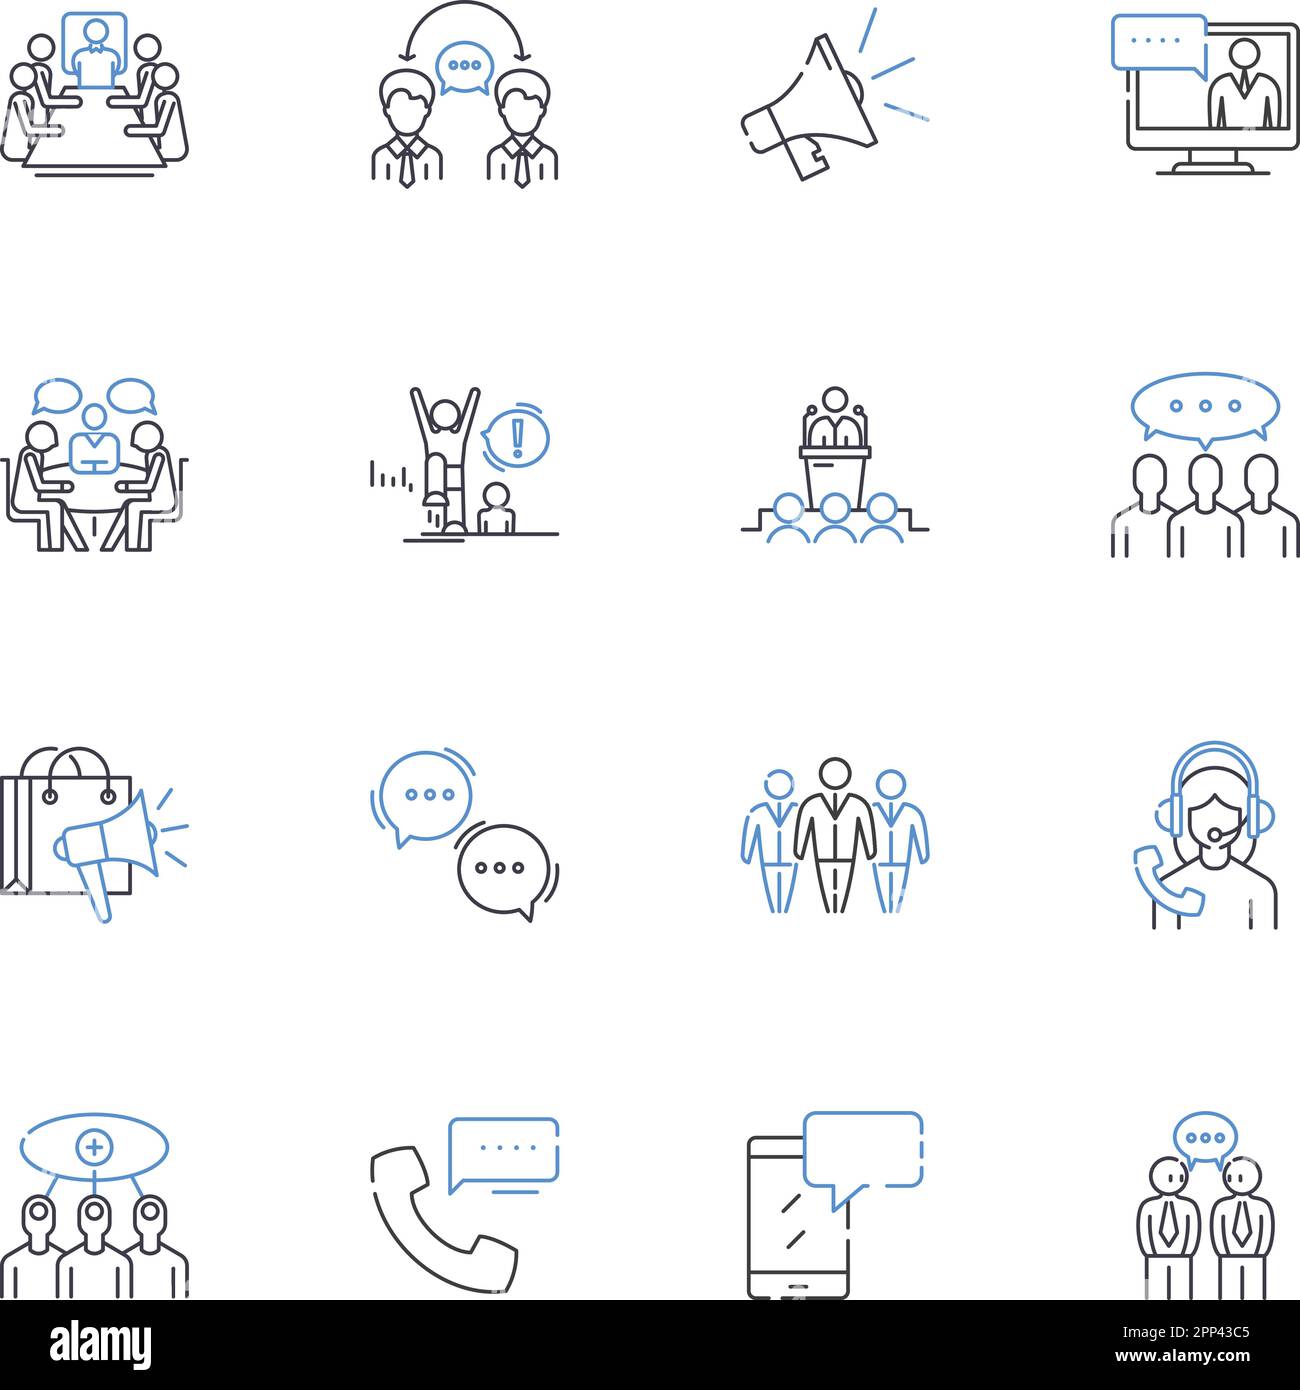 Discussing individuals line icons collection. Personality, Traits, Character, Behavior, Attitude, Perception, Identity vector and linear illustration Stock Vector